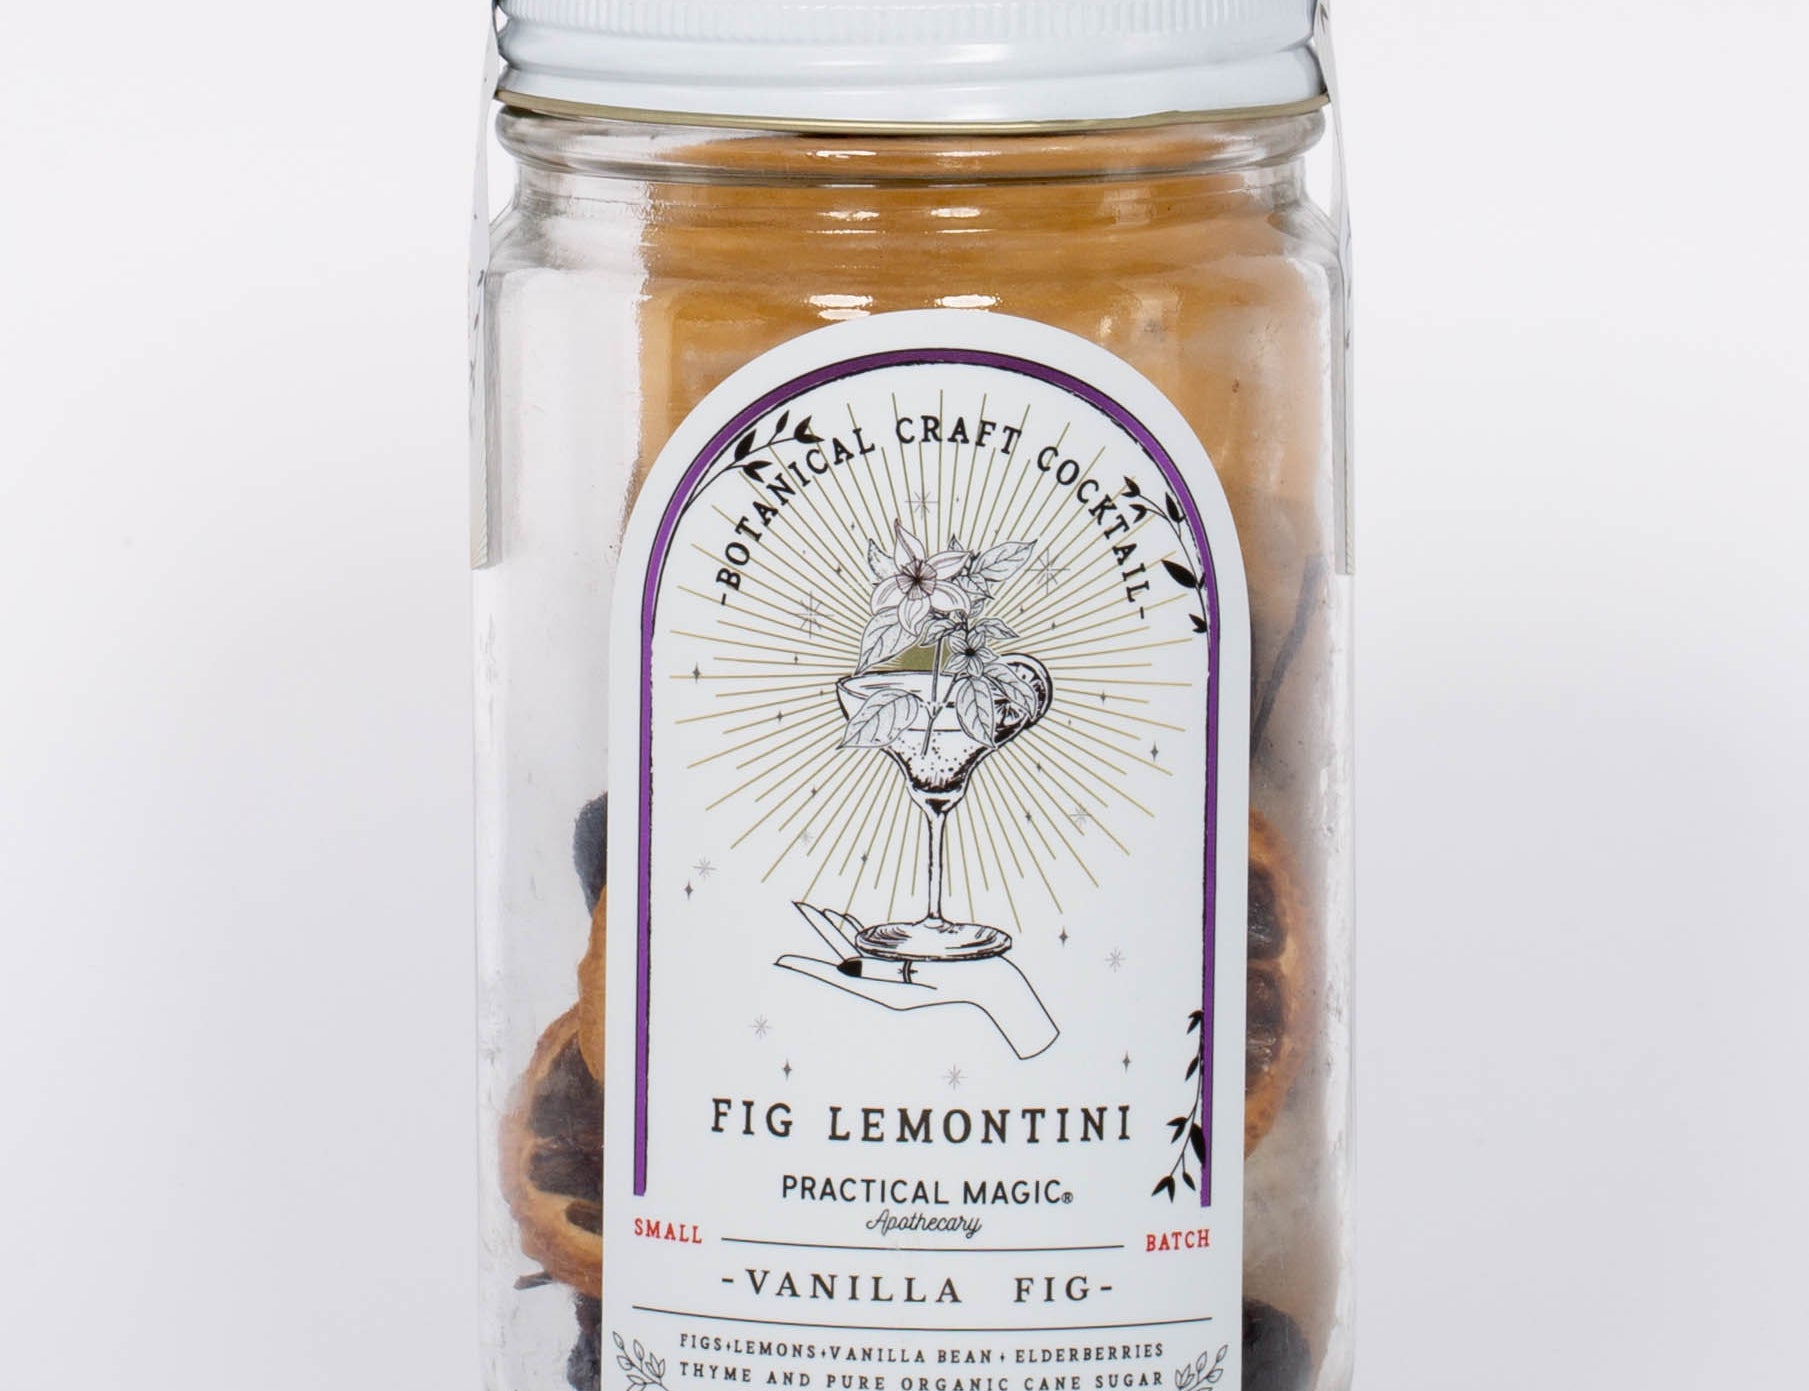 Fig Lemontini Botanical Craft Cocktails Kit by Practical Magic in clear jar with white lid and illustration of hand and drink on label. 